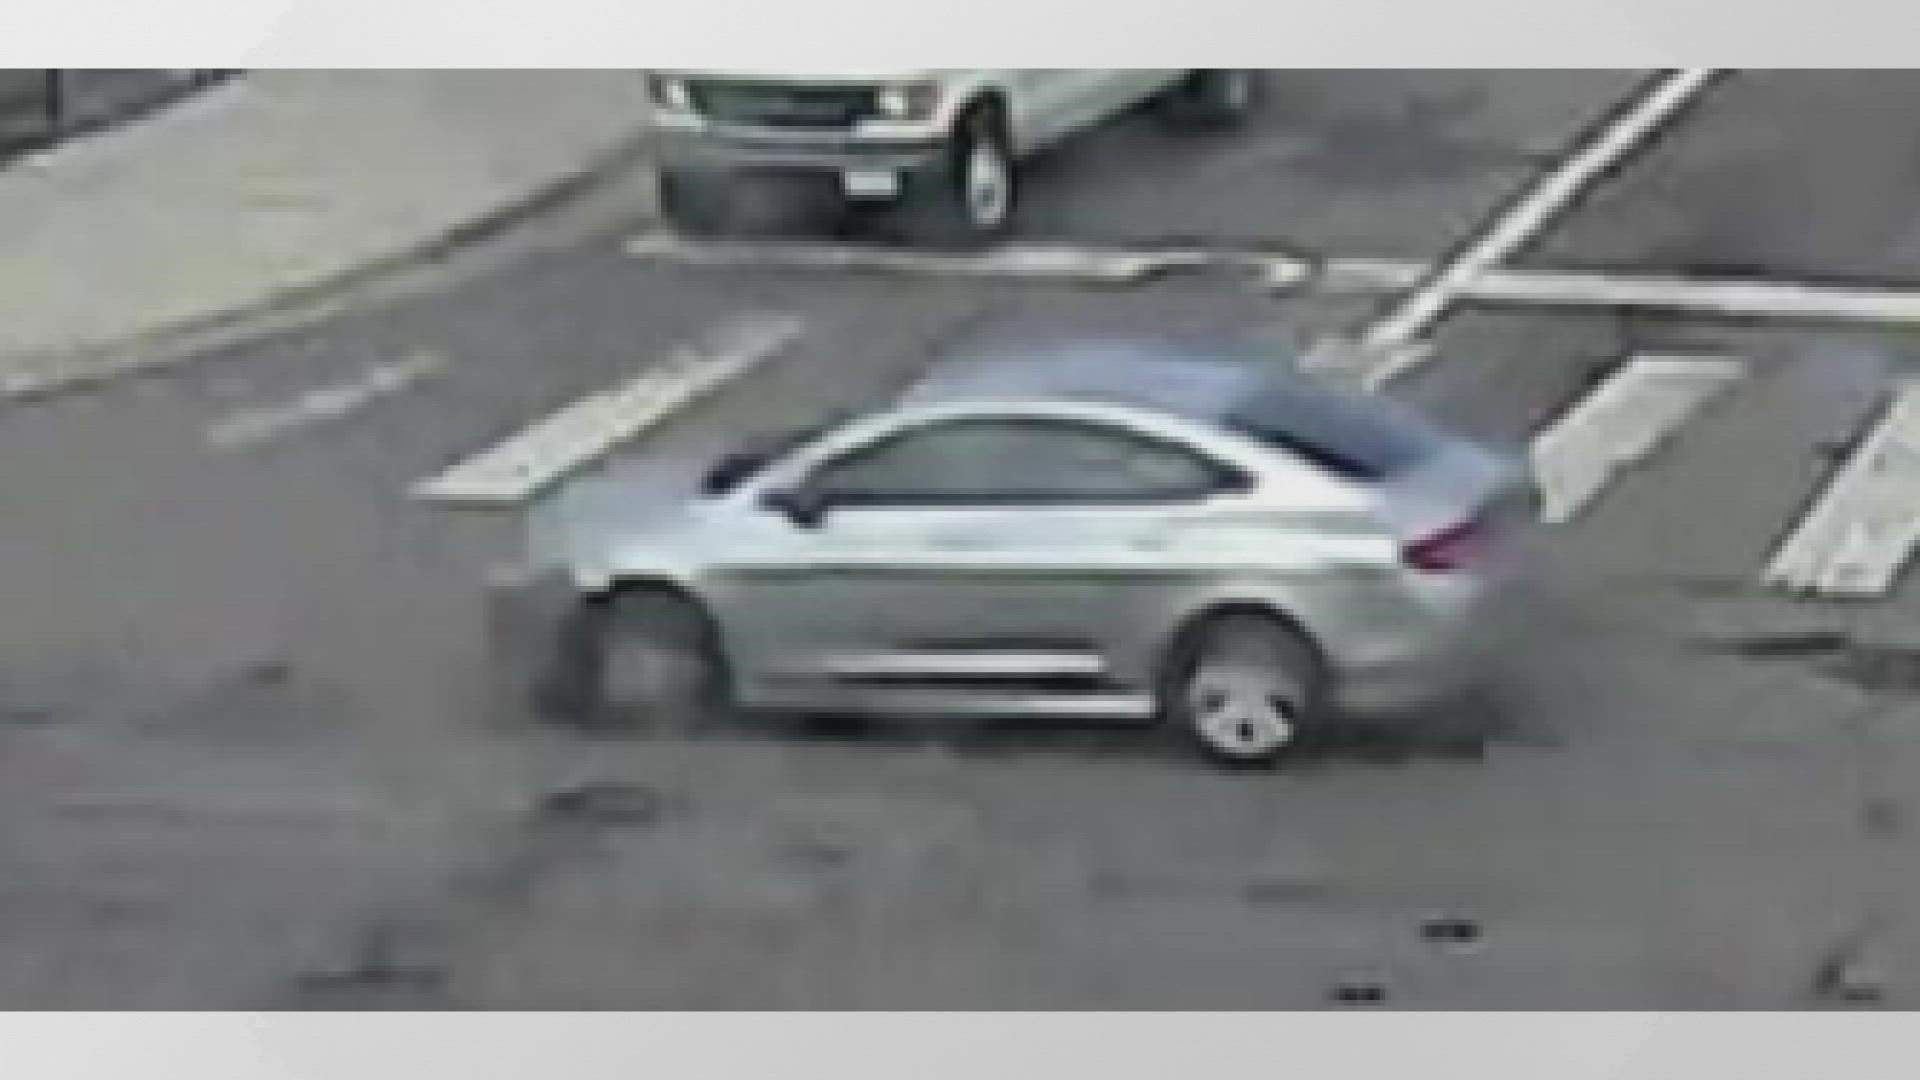 The suspect and the female arrived at the scene in a silver Chrysler 200 with slight damage to the left front quarter panel, Colorado license plate ALO I76.